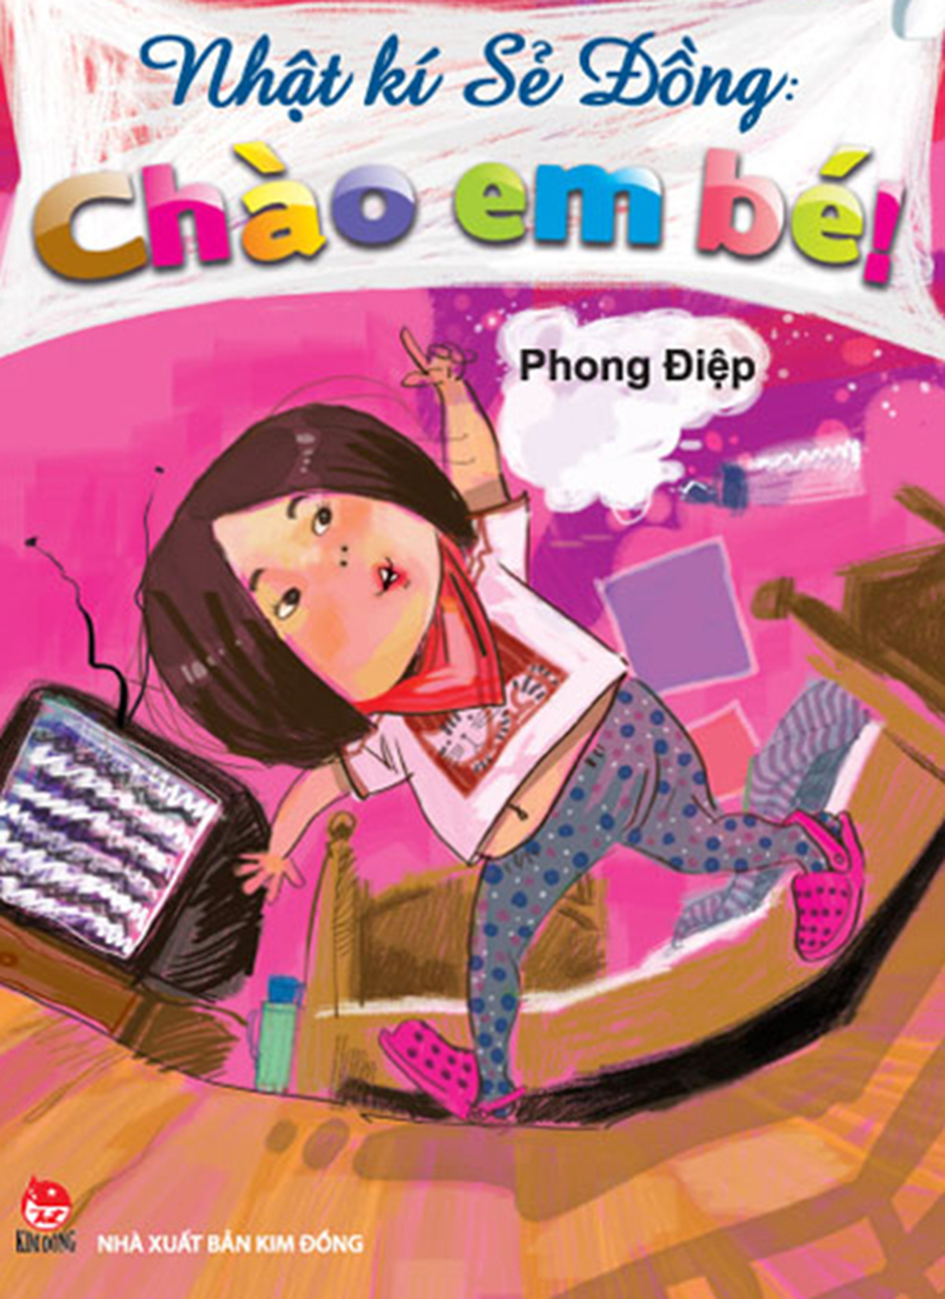 nhat ky se dong chao em be